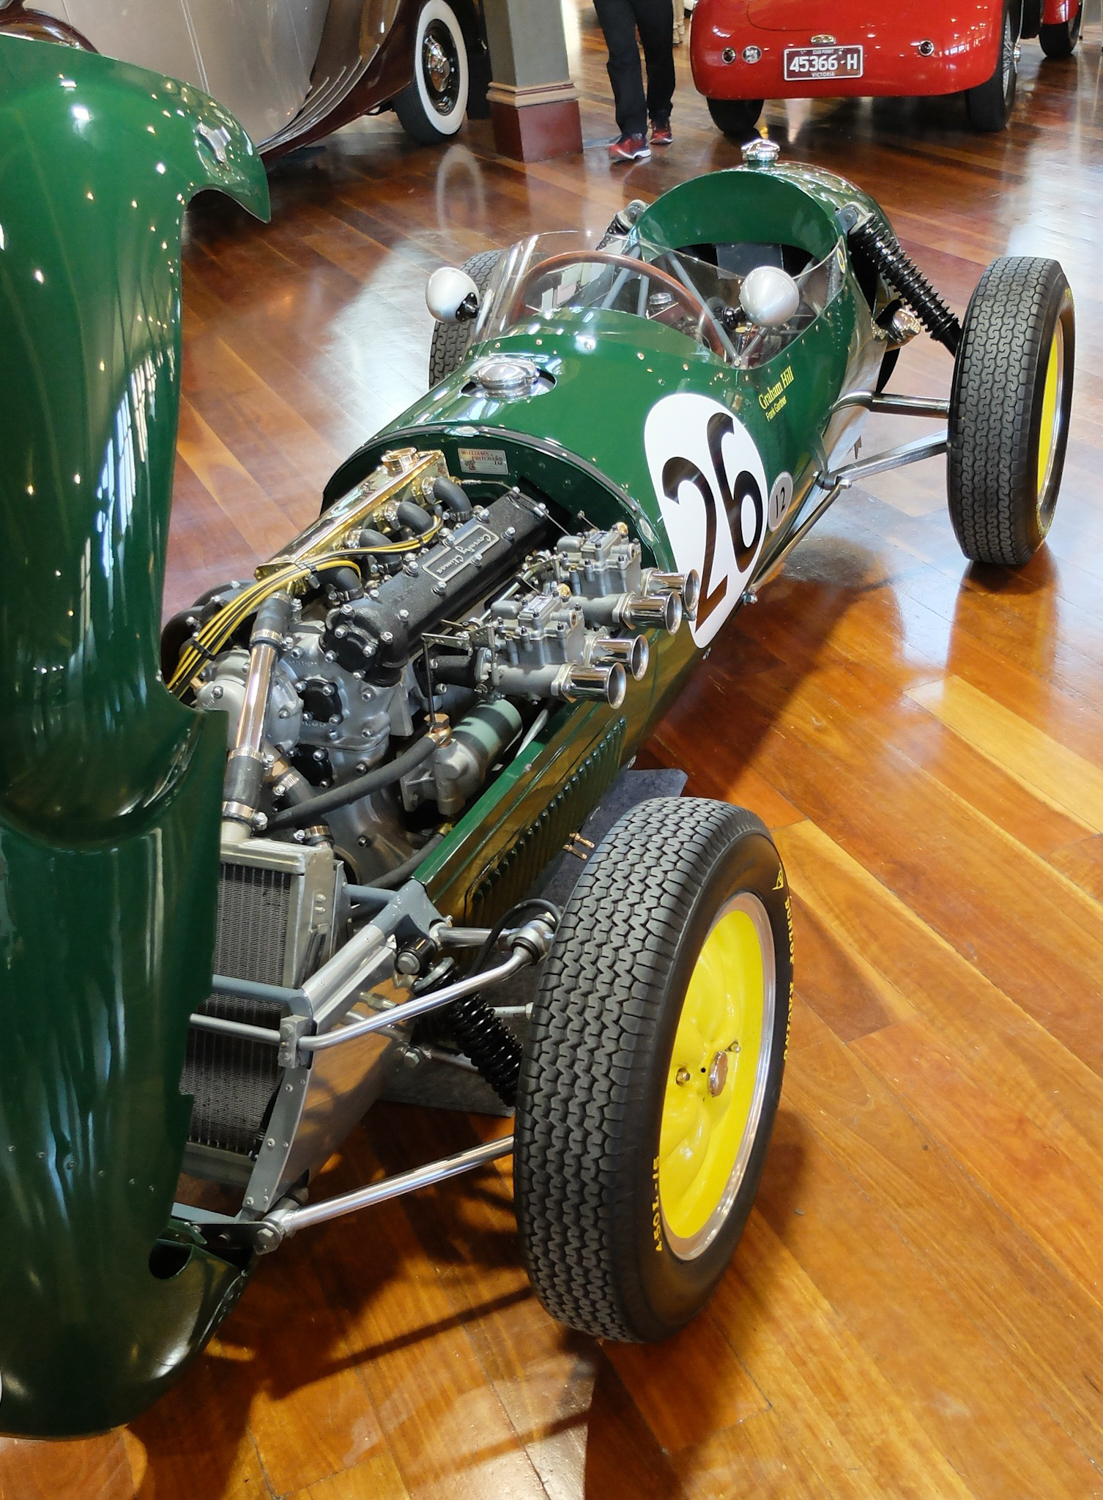 Ex-Graham Hill 1957 Lotus 12 in perfect concours condition.